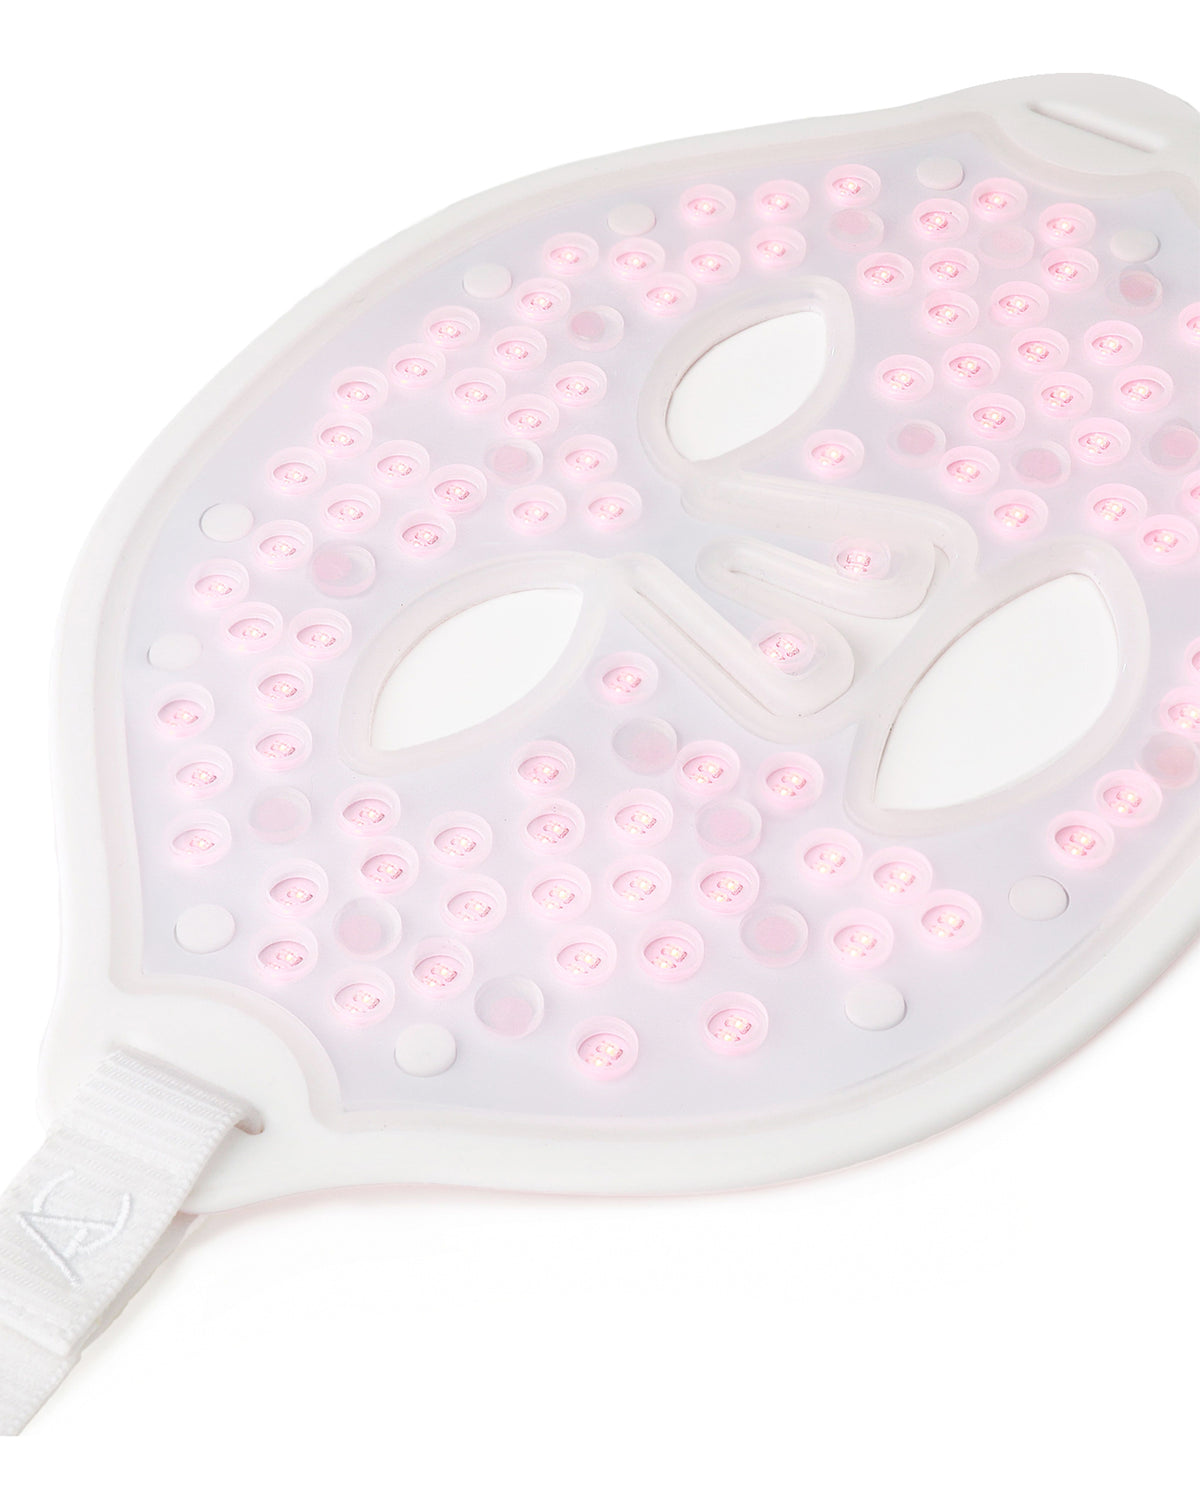 Crystal Led Anti-Acne And Anti-Aging Face Mask